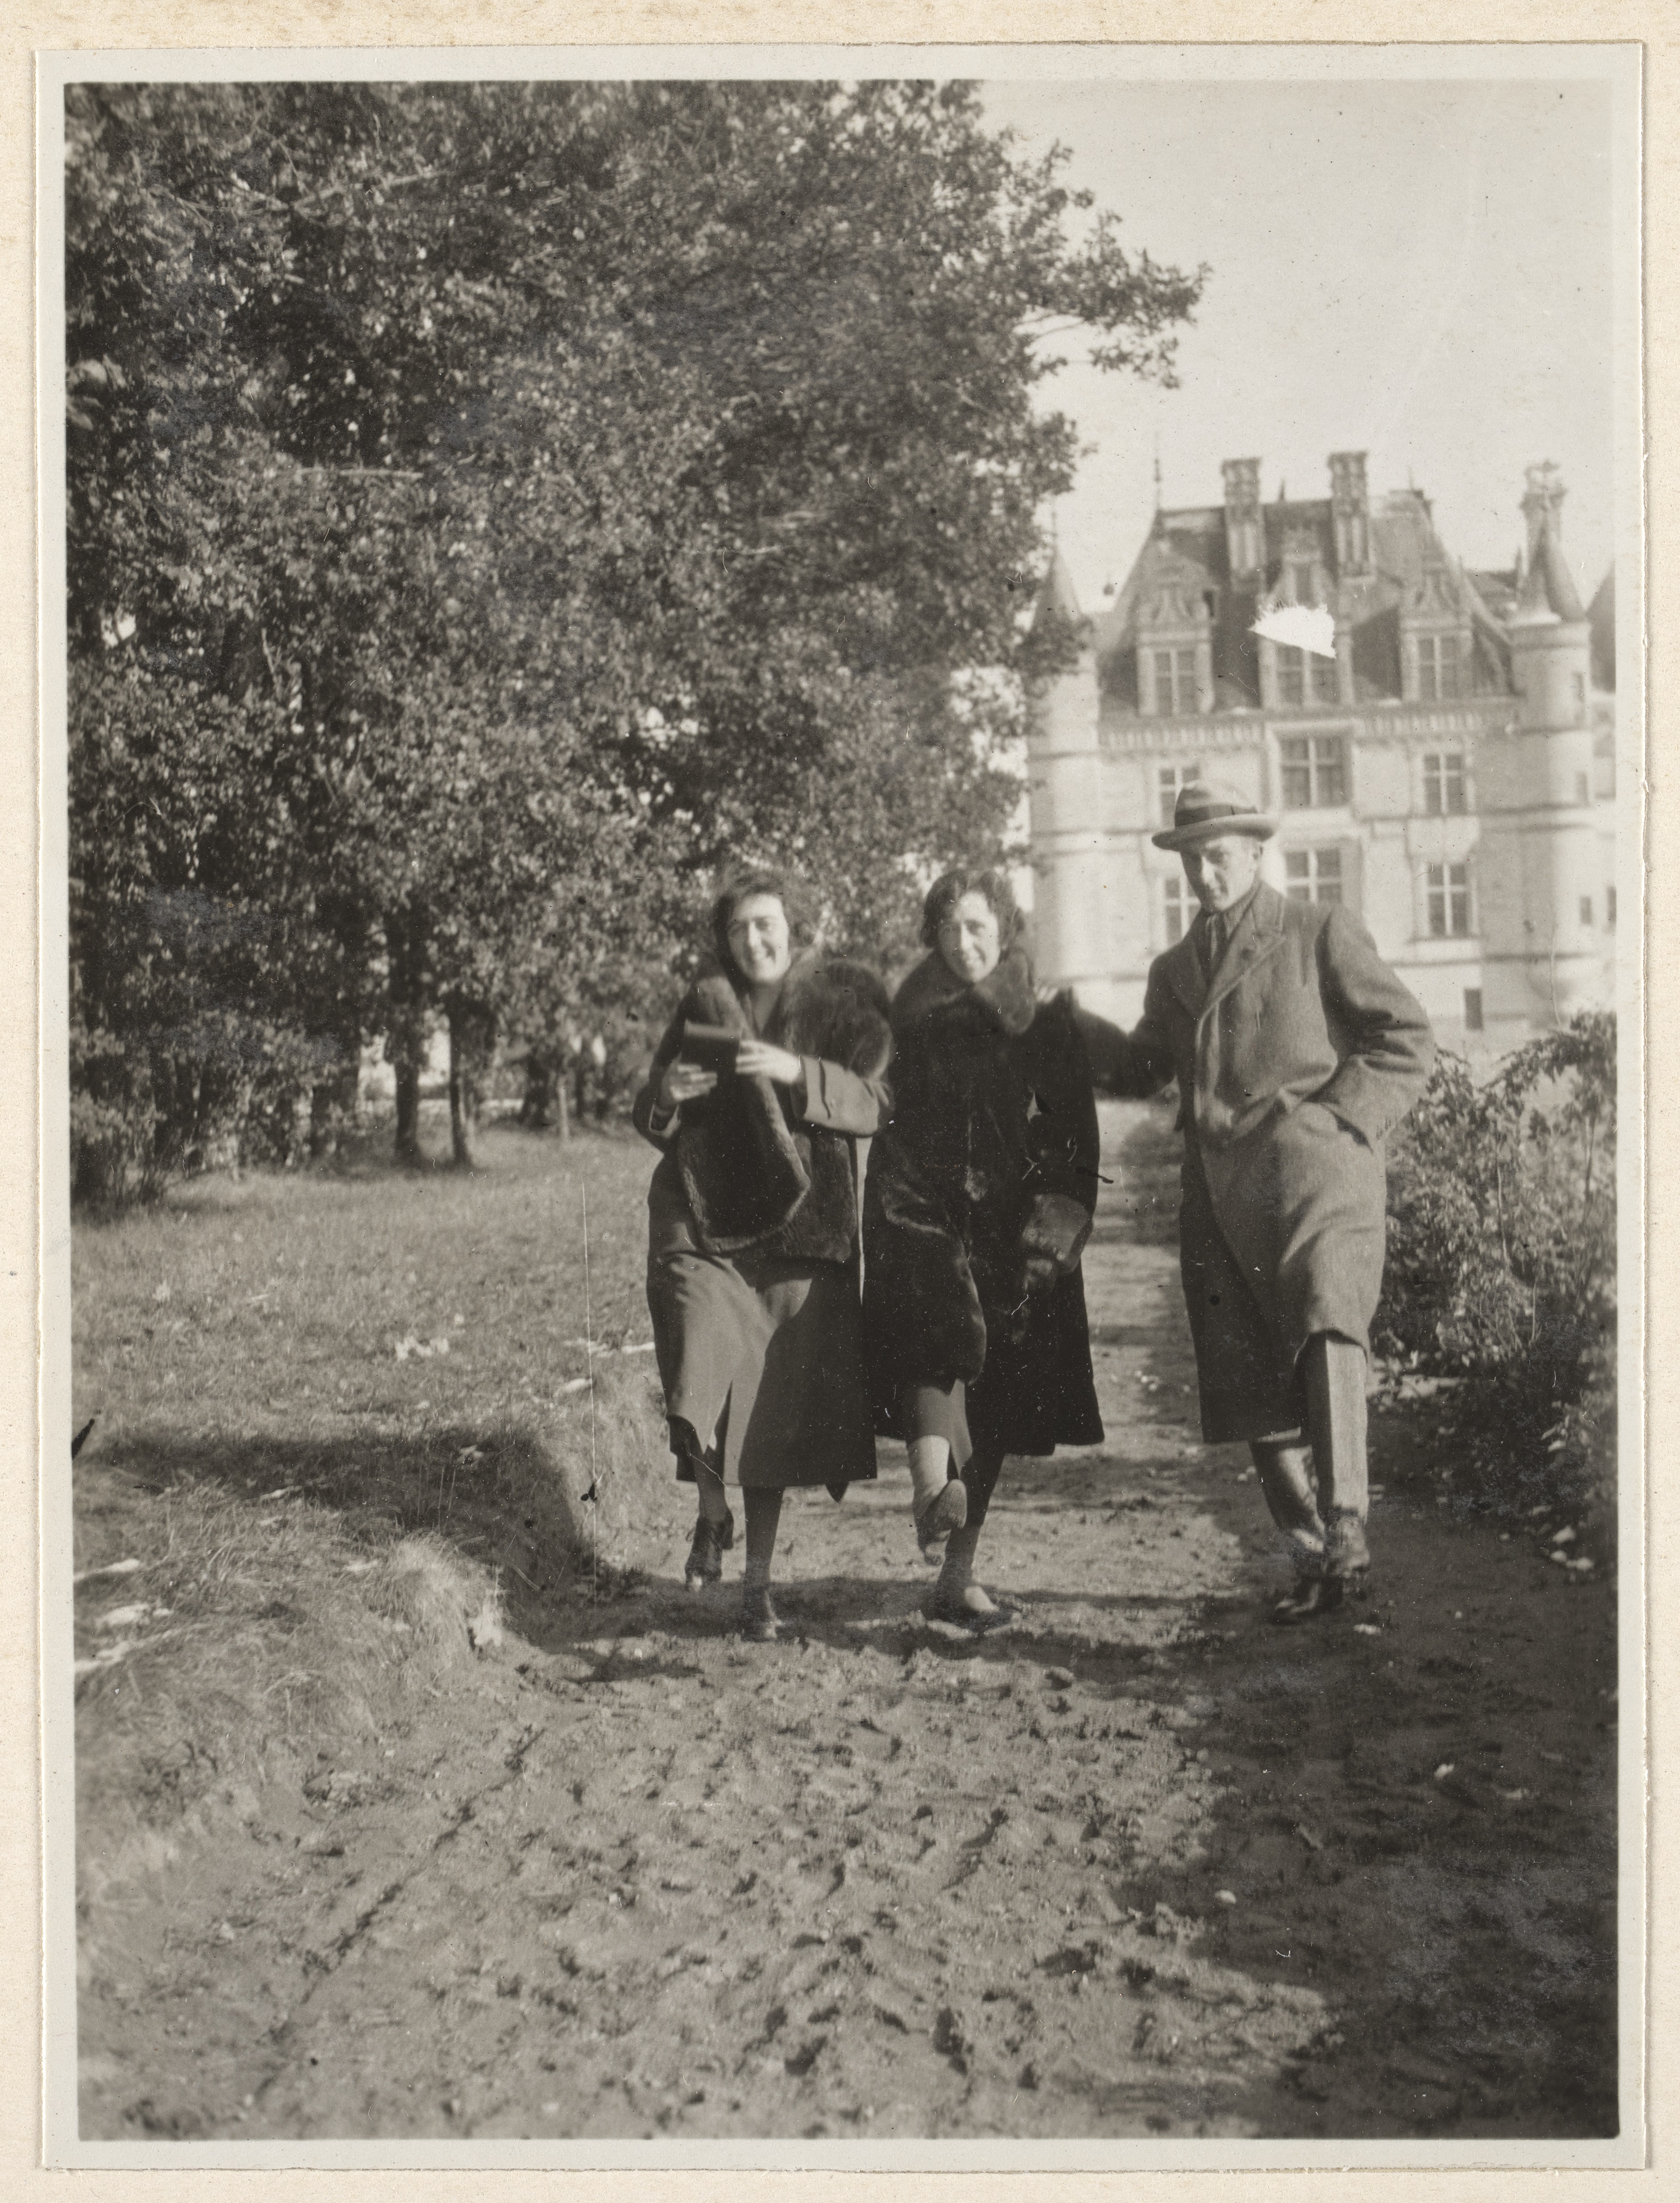 Two women and one man dressed in winter coats skipping down path, Chenonceau Château in background